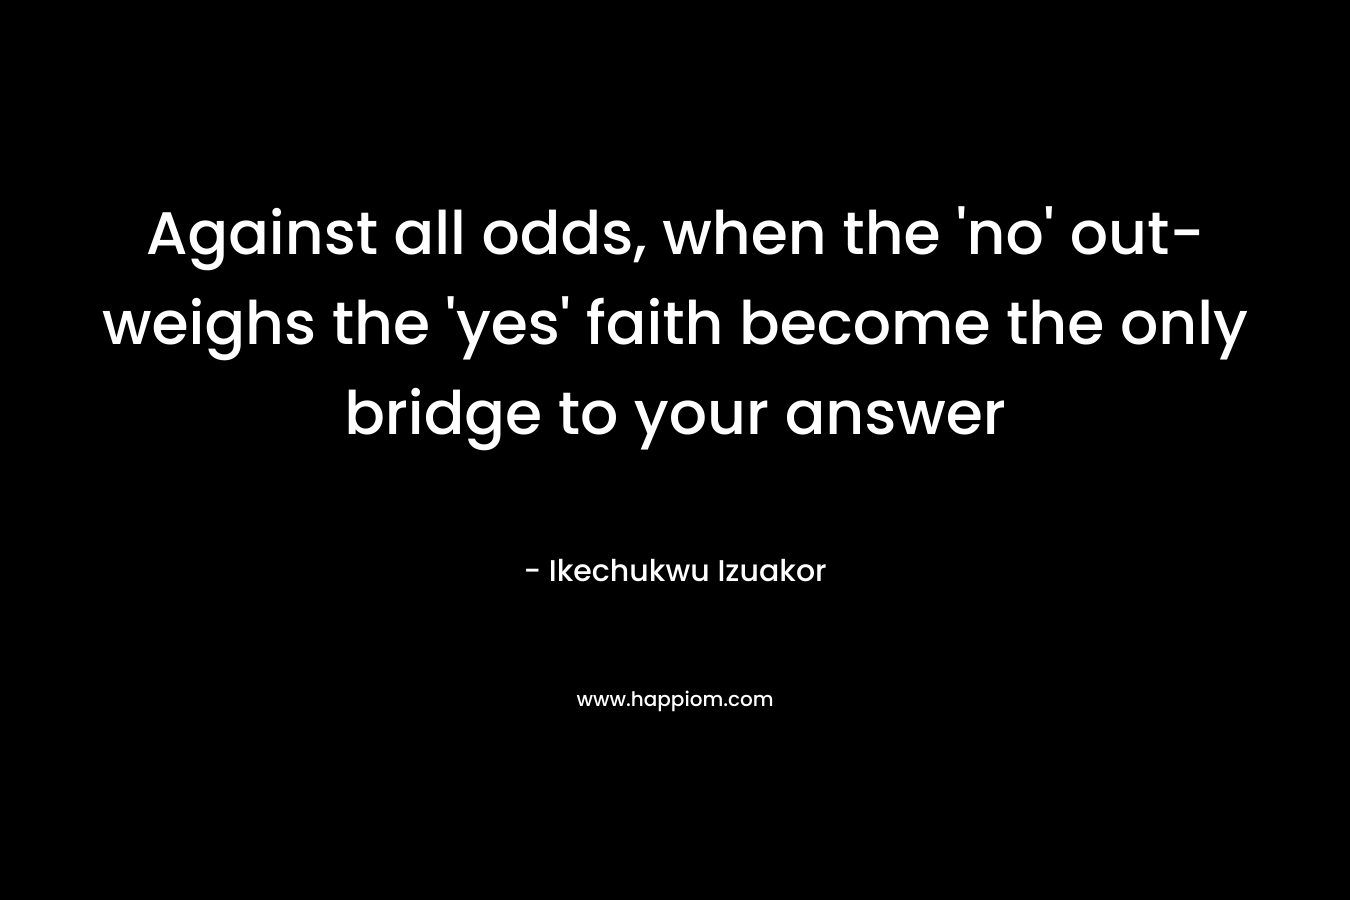 Against all odds, when the 'no' out-weighs the 'yes' faith become the only bridge to your answer